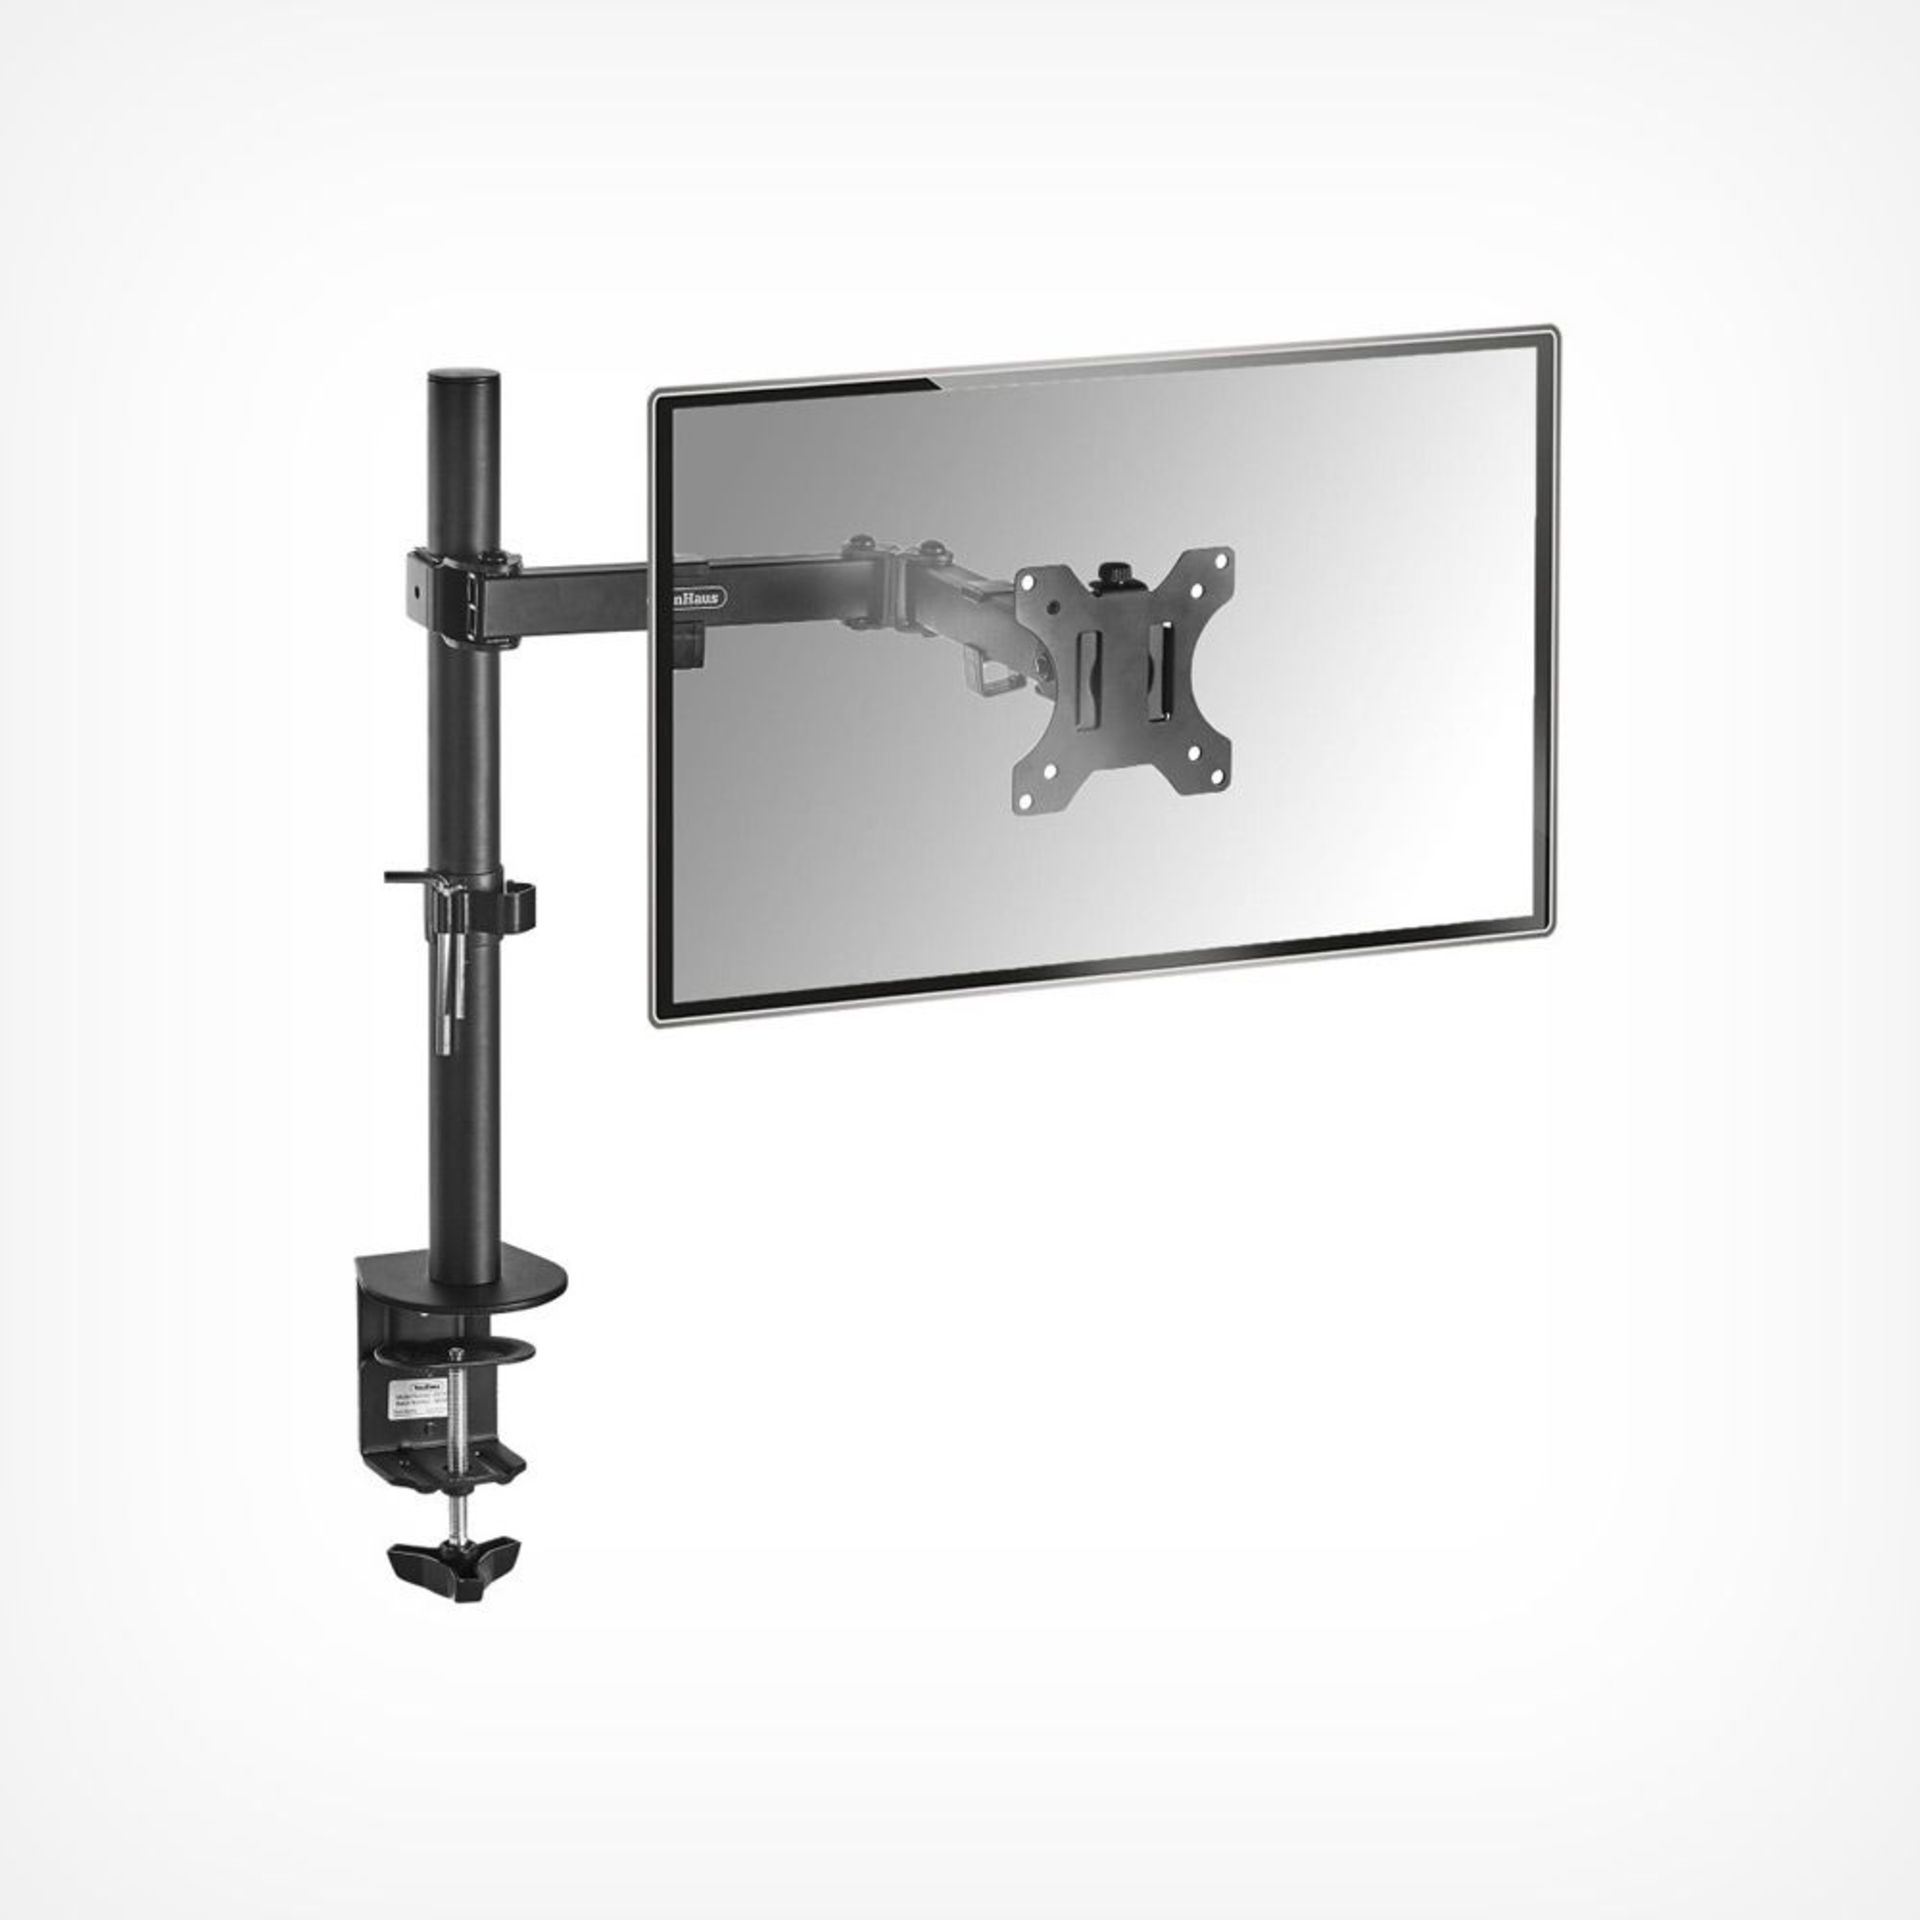 Monitor Mount with Desk Clamp. - BI. Simply attach the extra-strong clamp to the edge of your desk